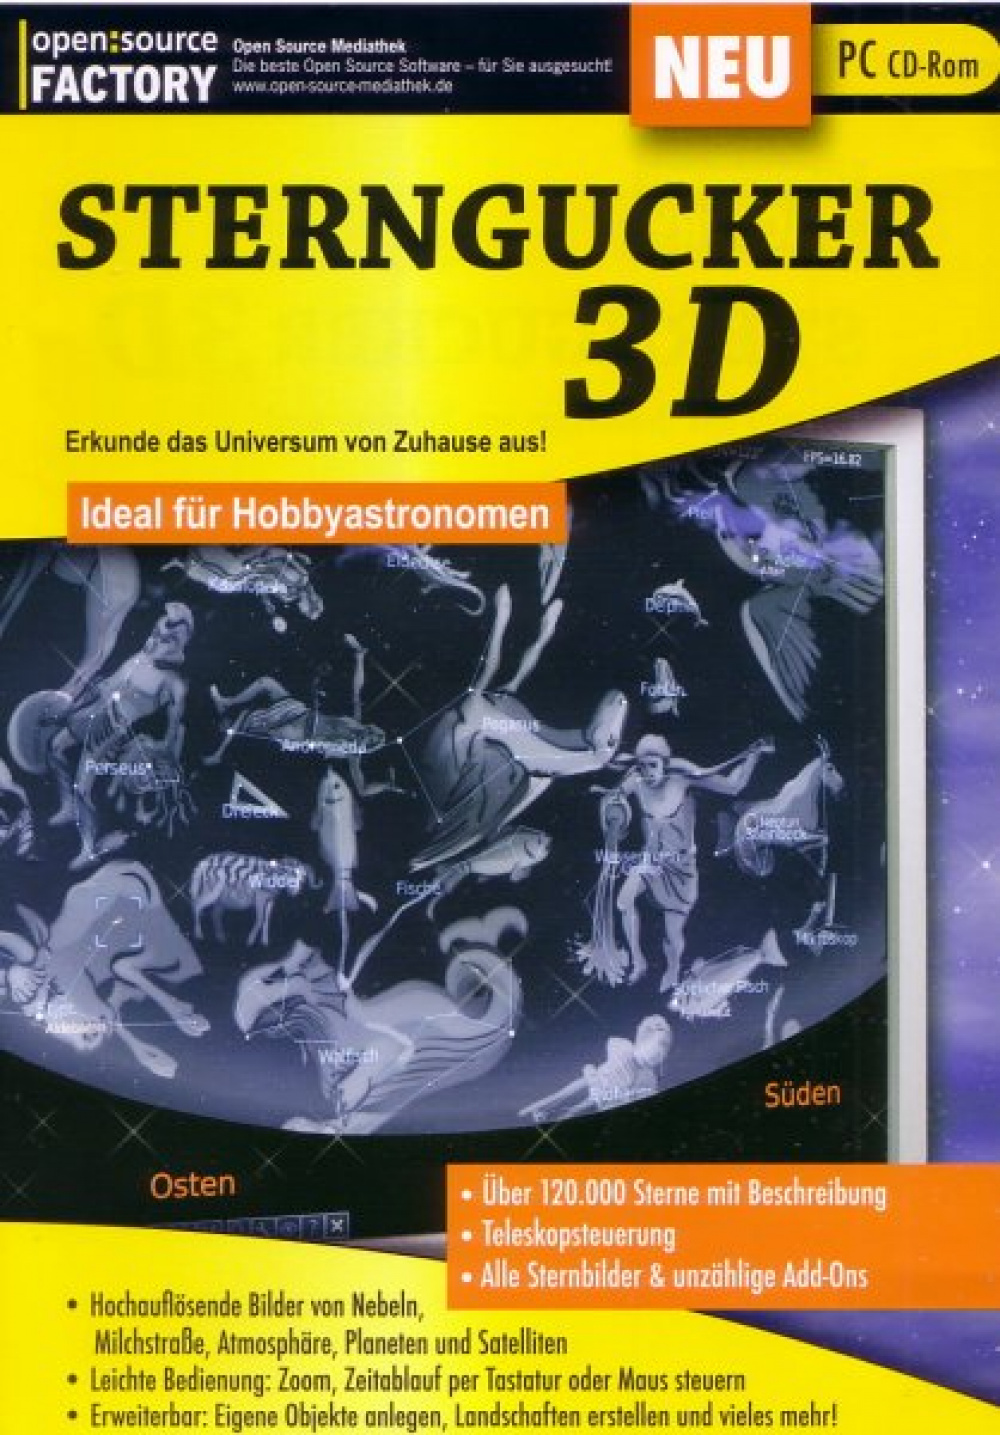 Sterngucker 3d Video Game Reviews And Previews Pc Ps4 Xbox One And Mobile